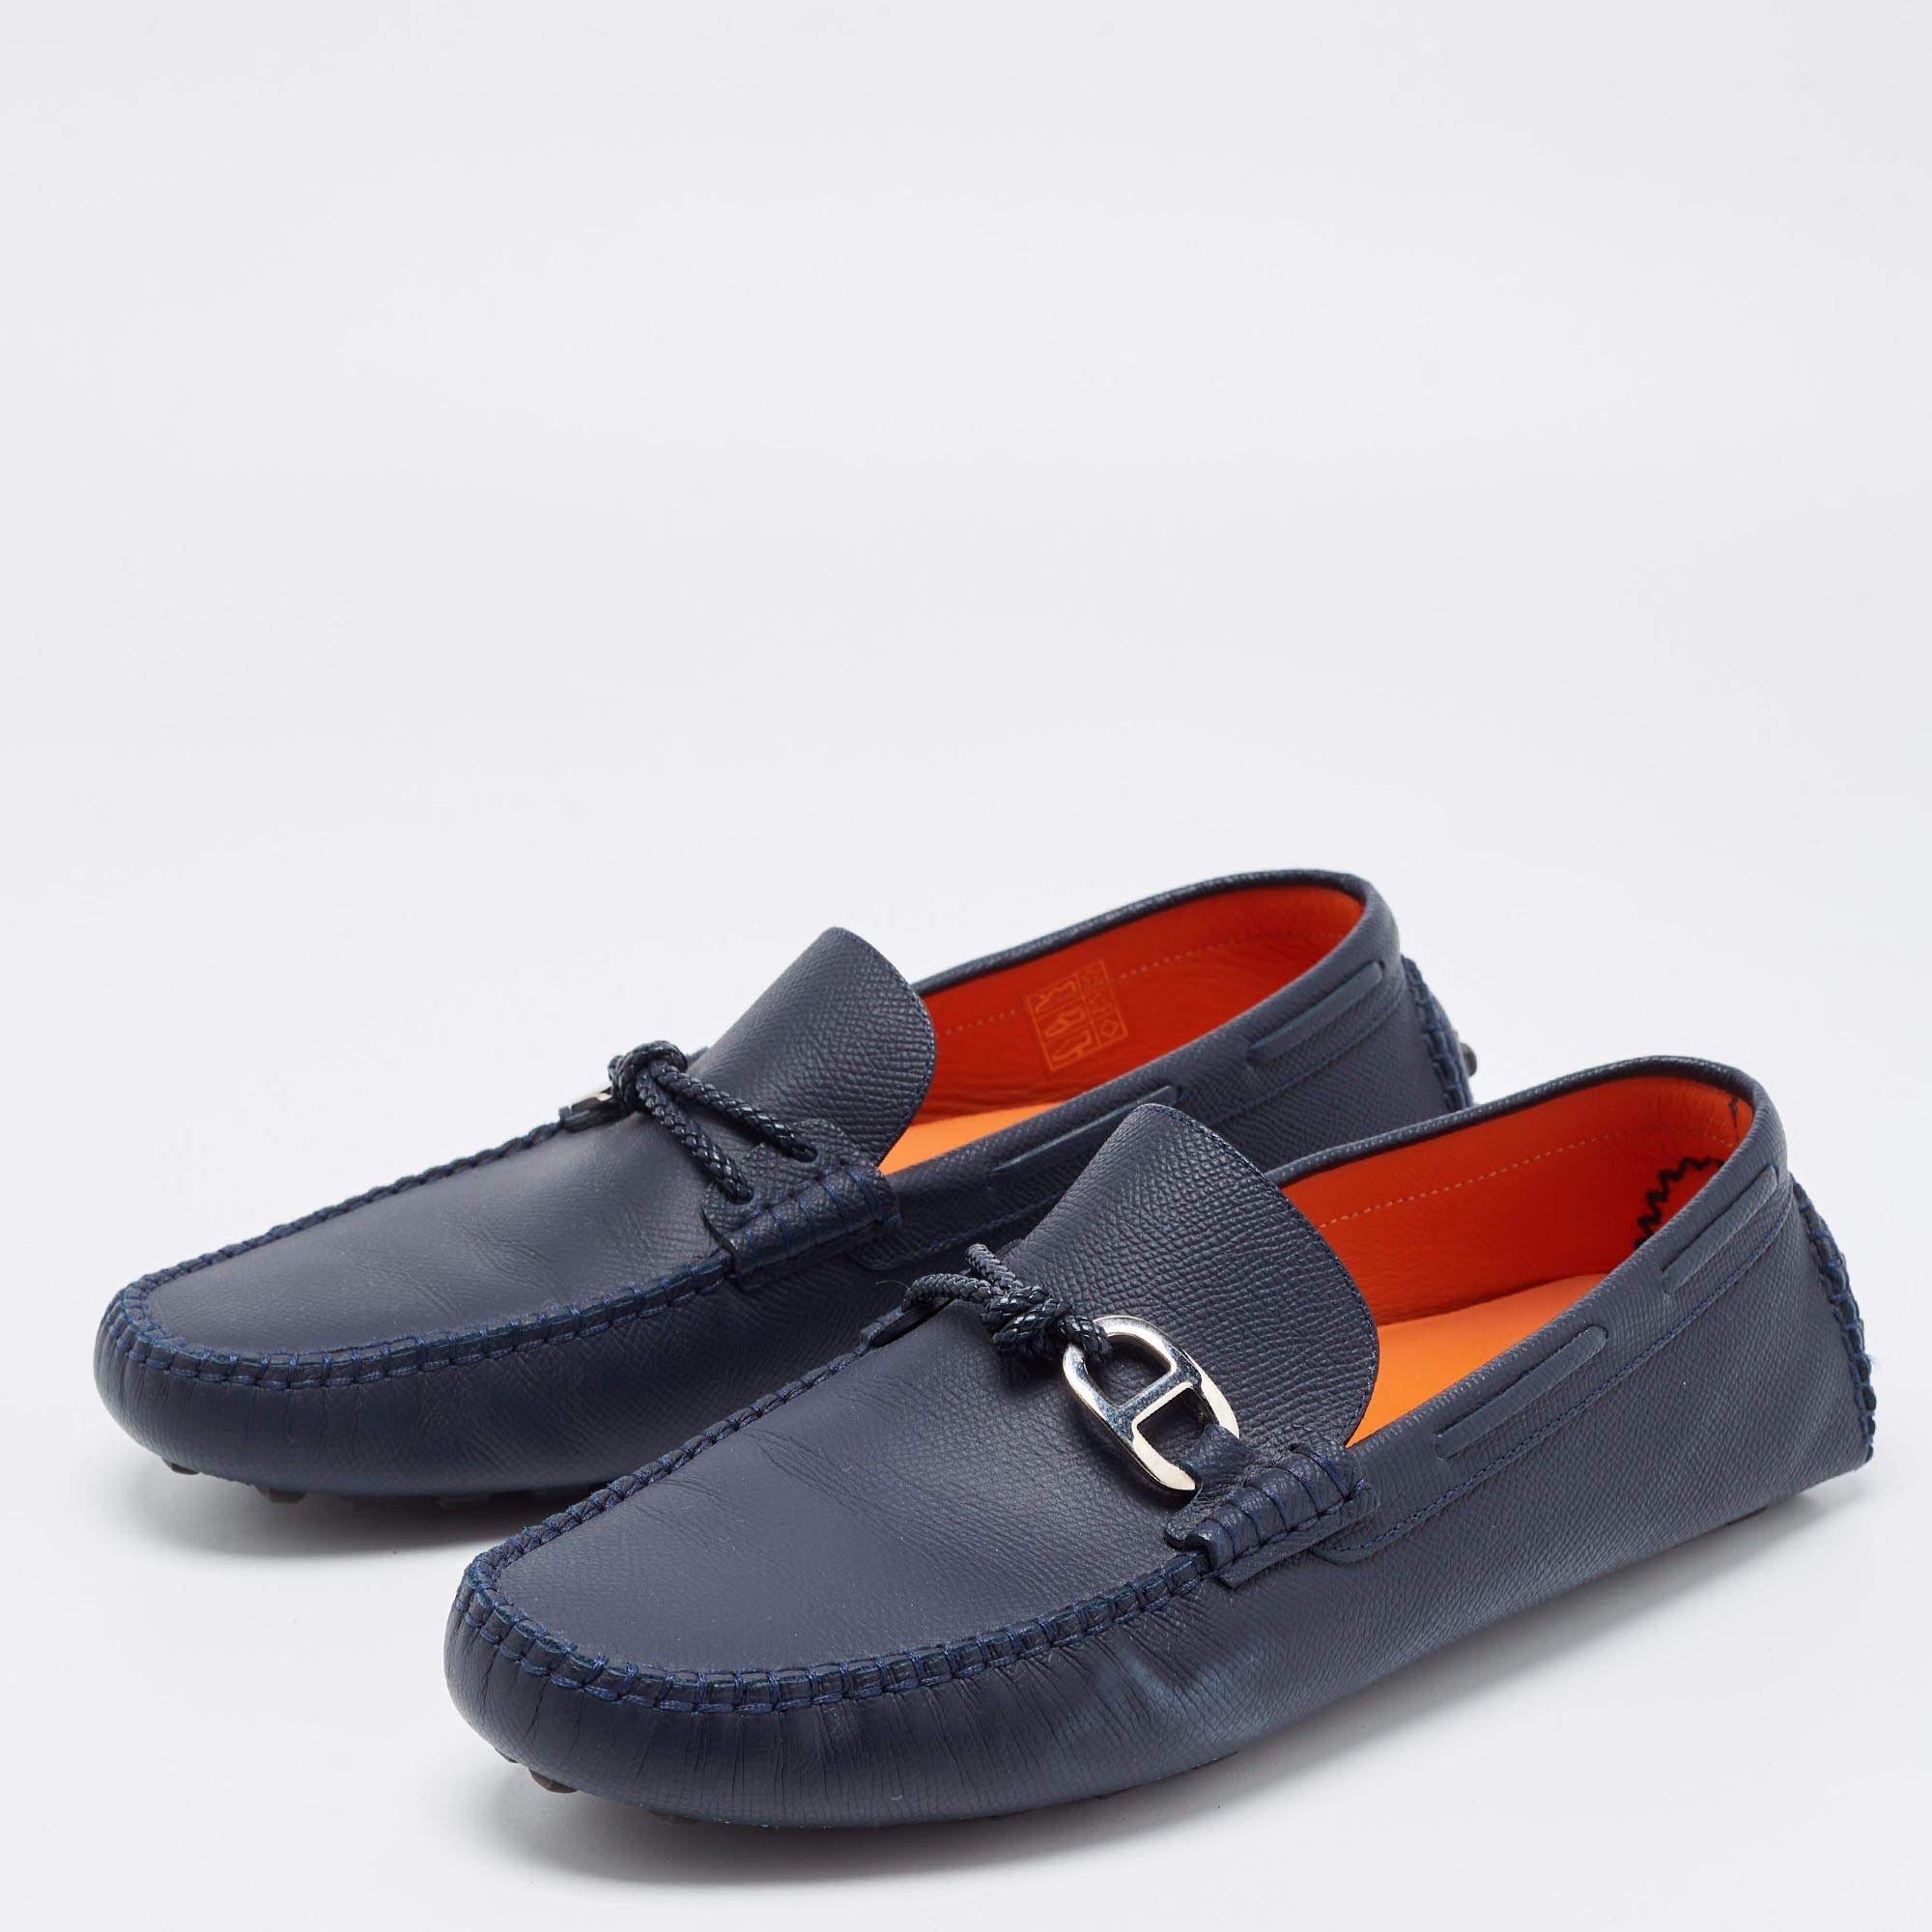 Let comfort and classic style be yours with these designer loafers from Hermes. Crafted with skill, the high-quality shoes have the perfect construction to take you through the day with utmost ease.

